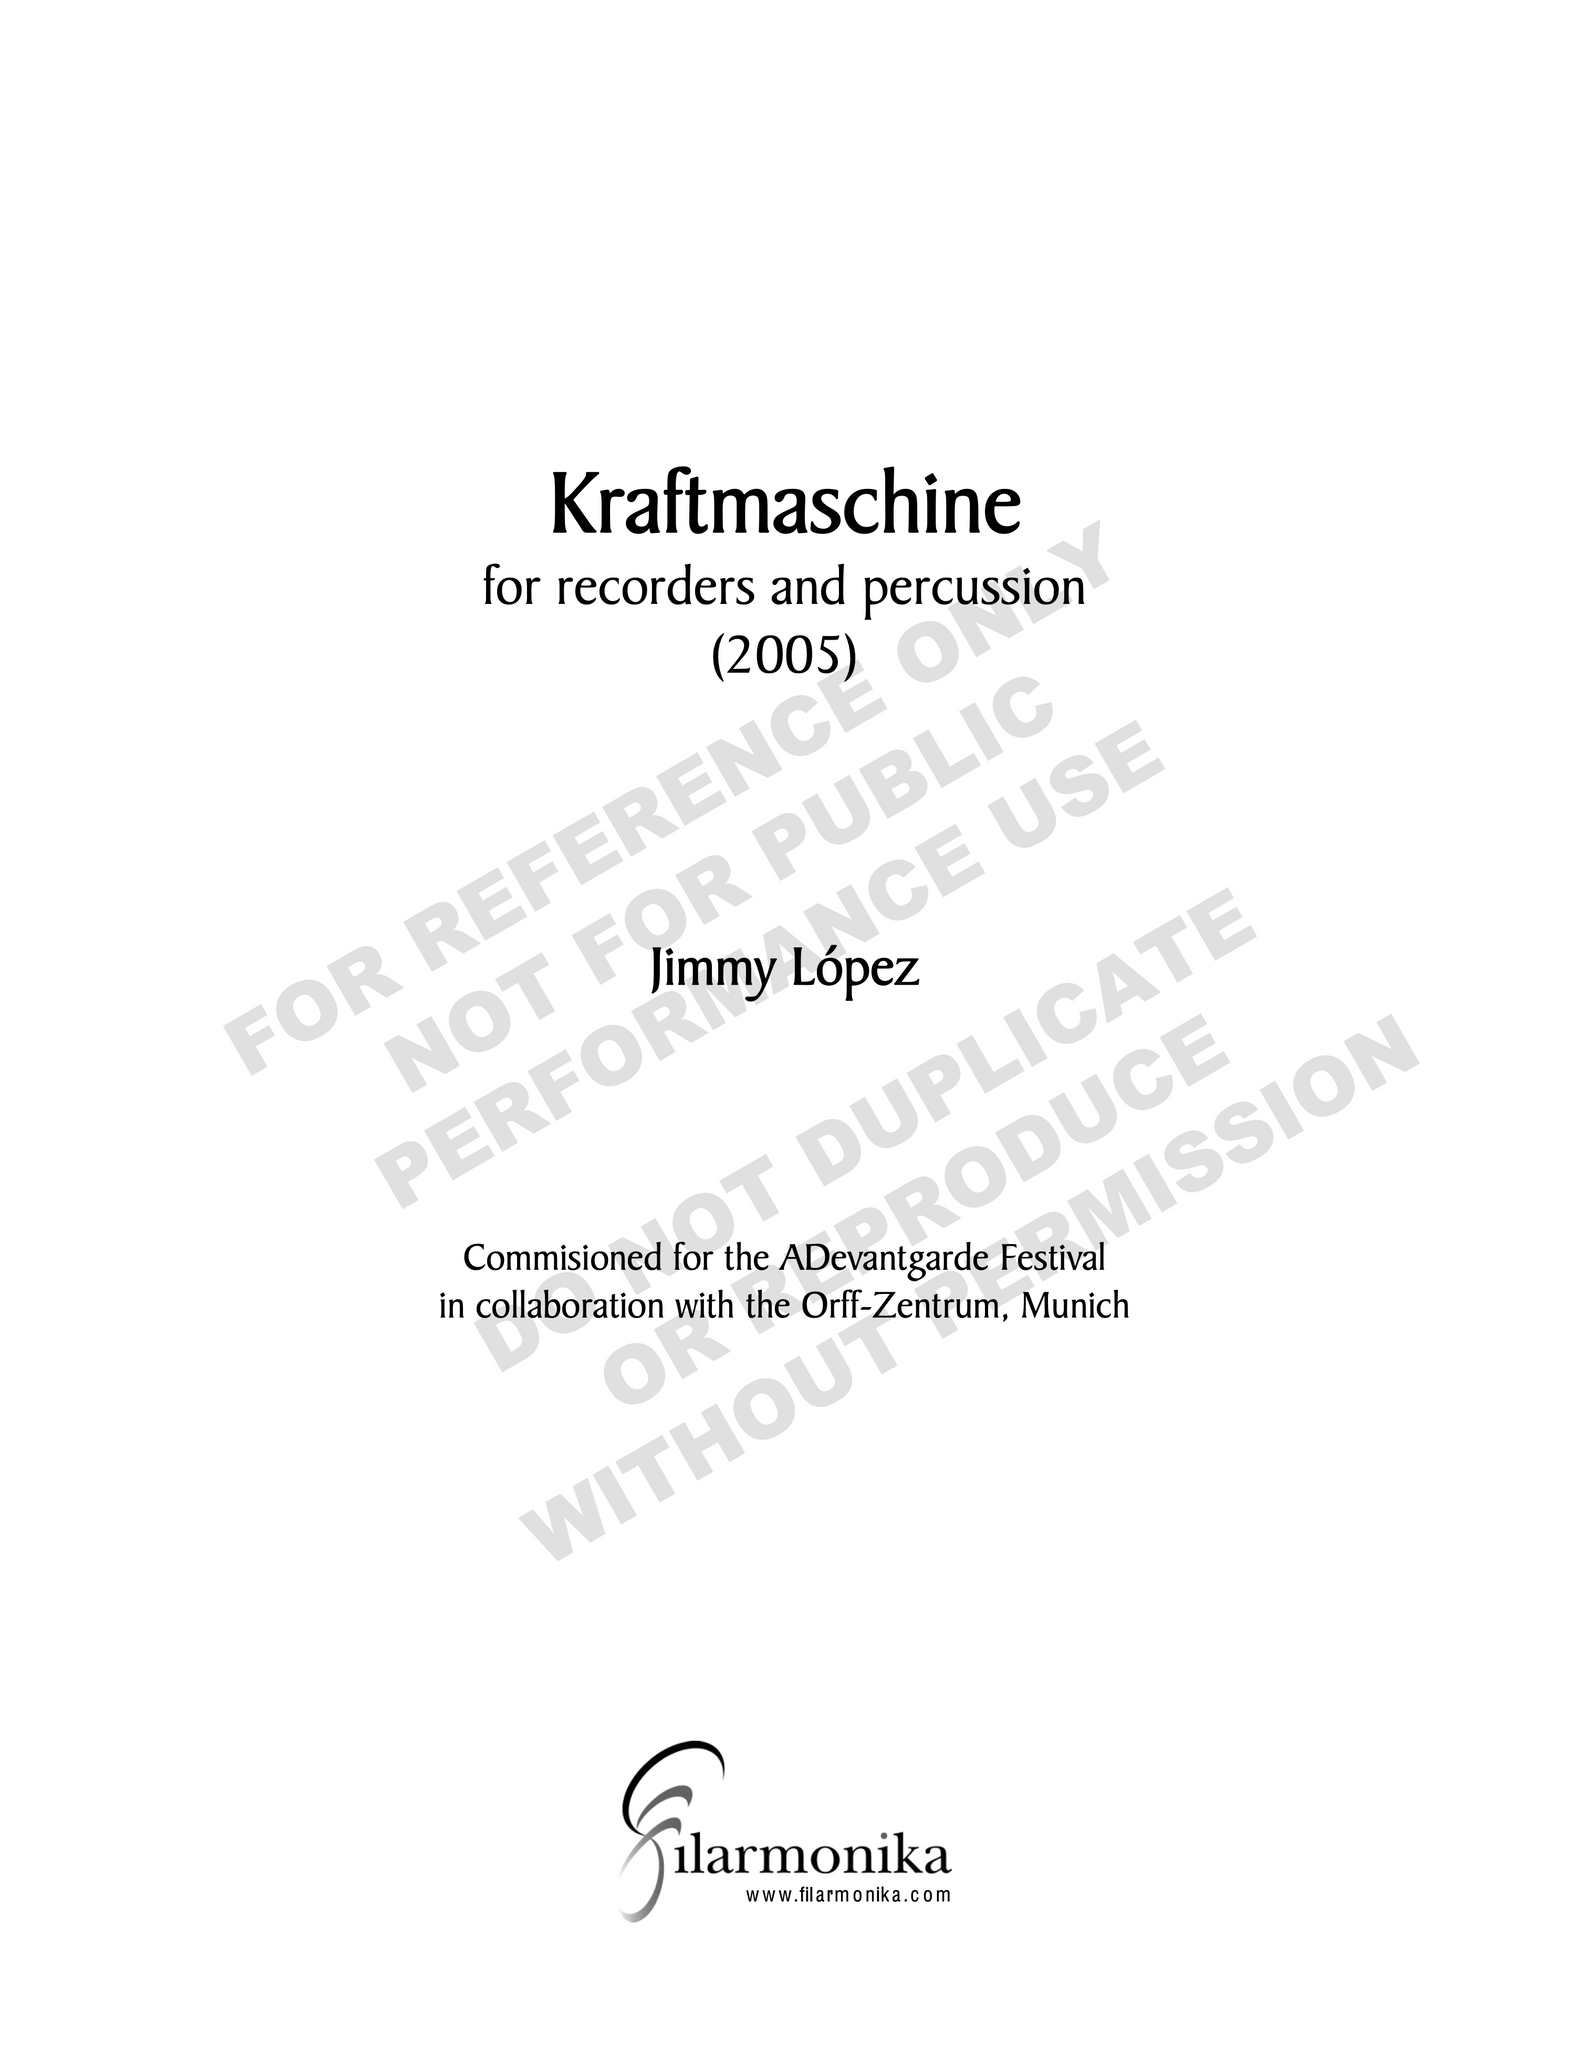 Kraftmaschine, for recorder and percussion